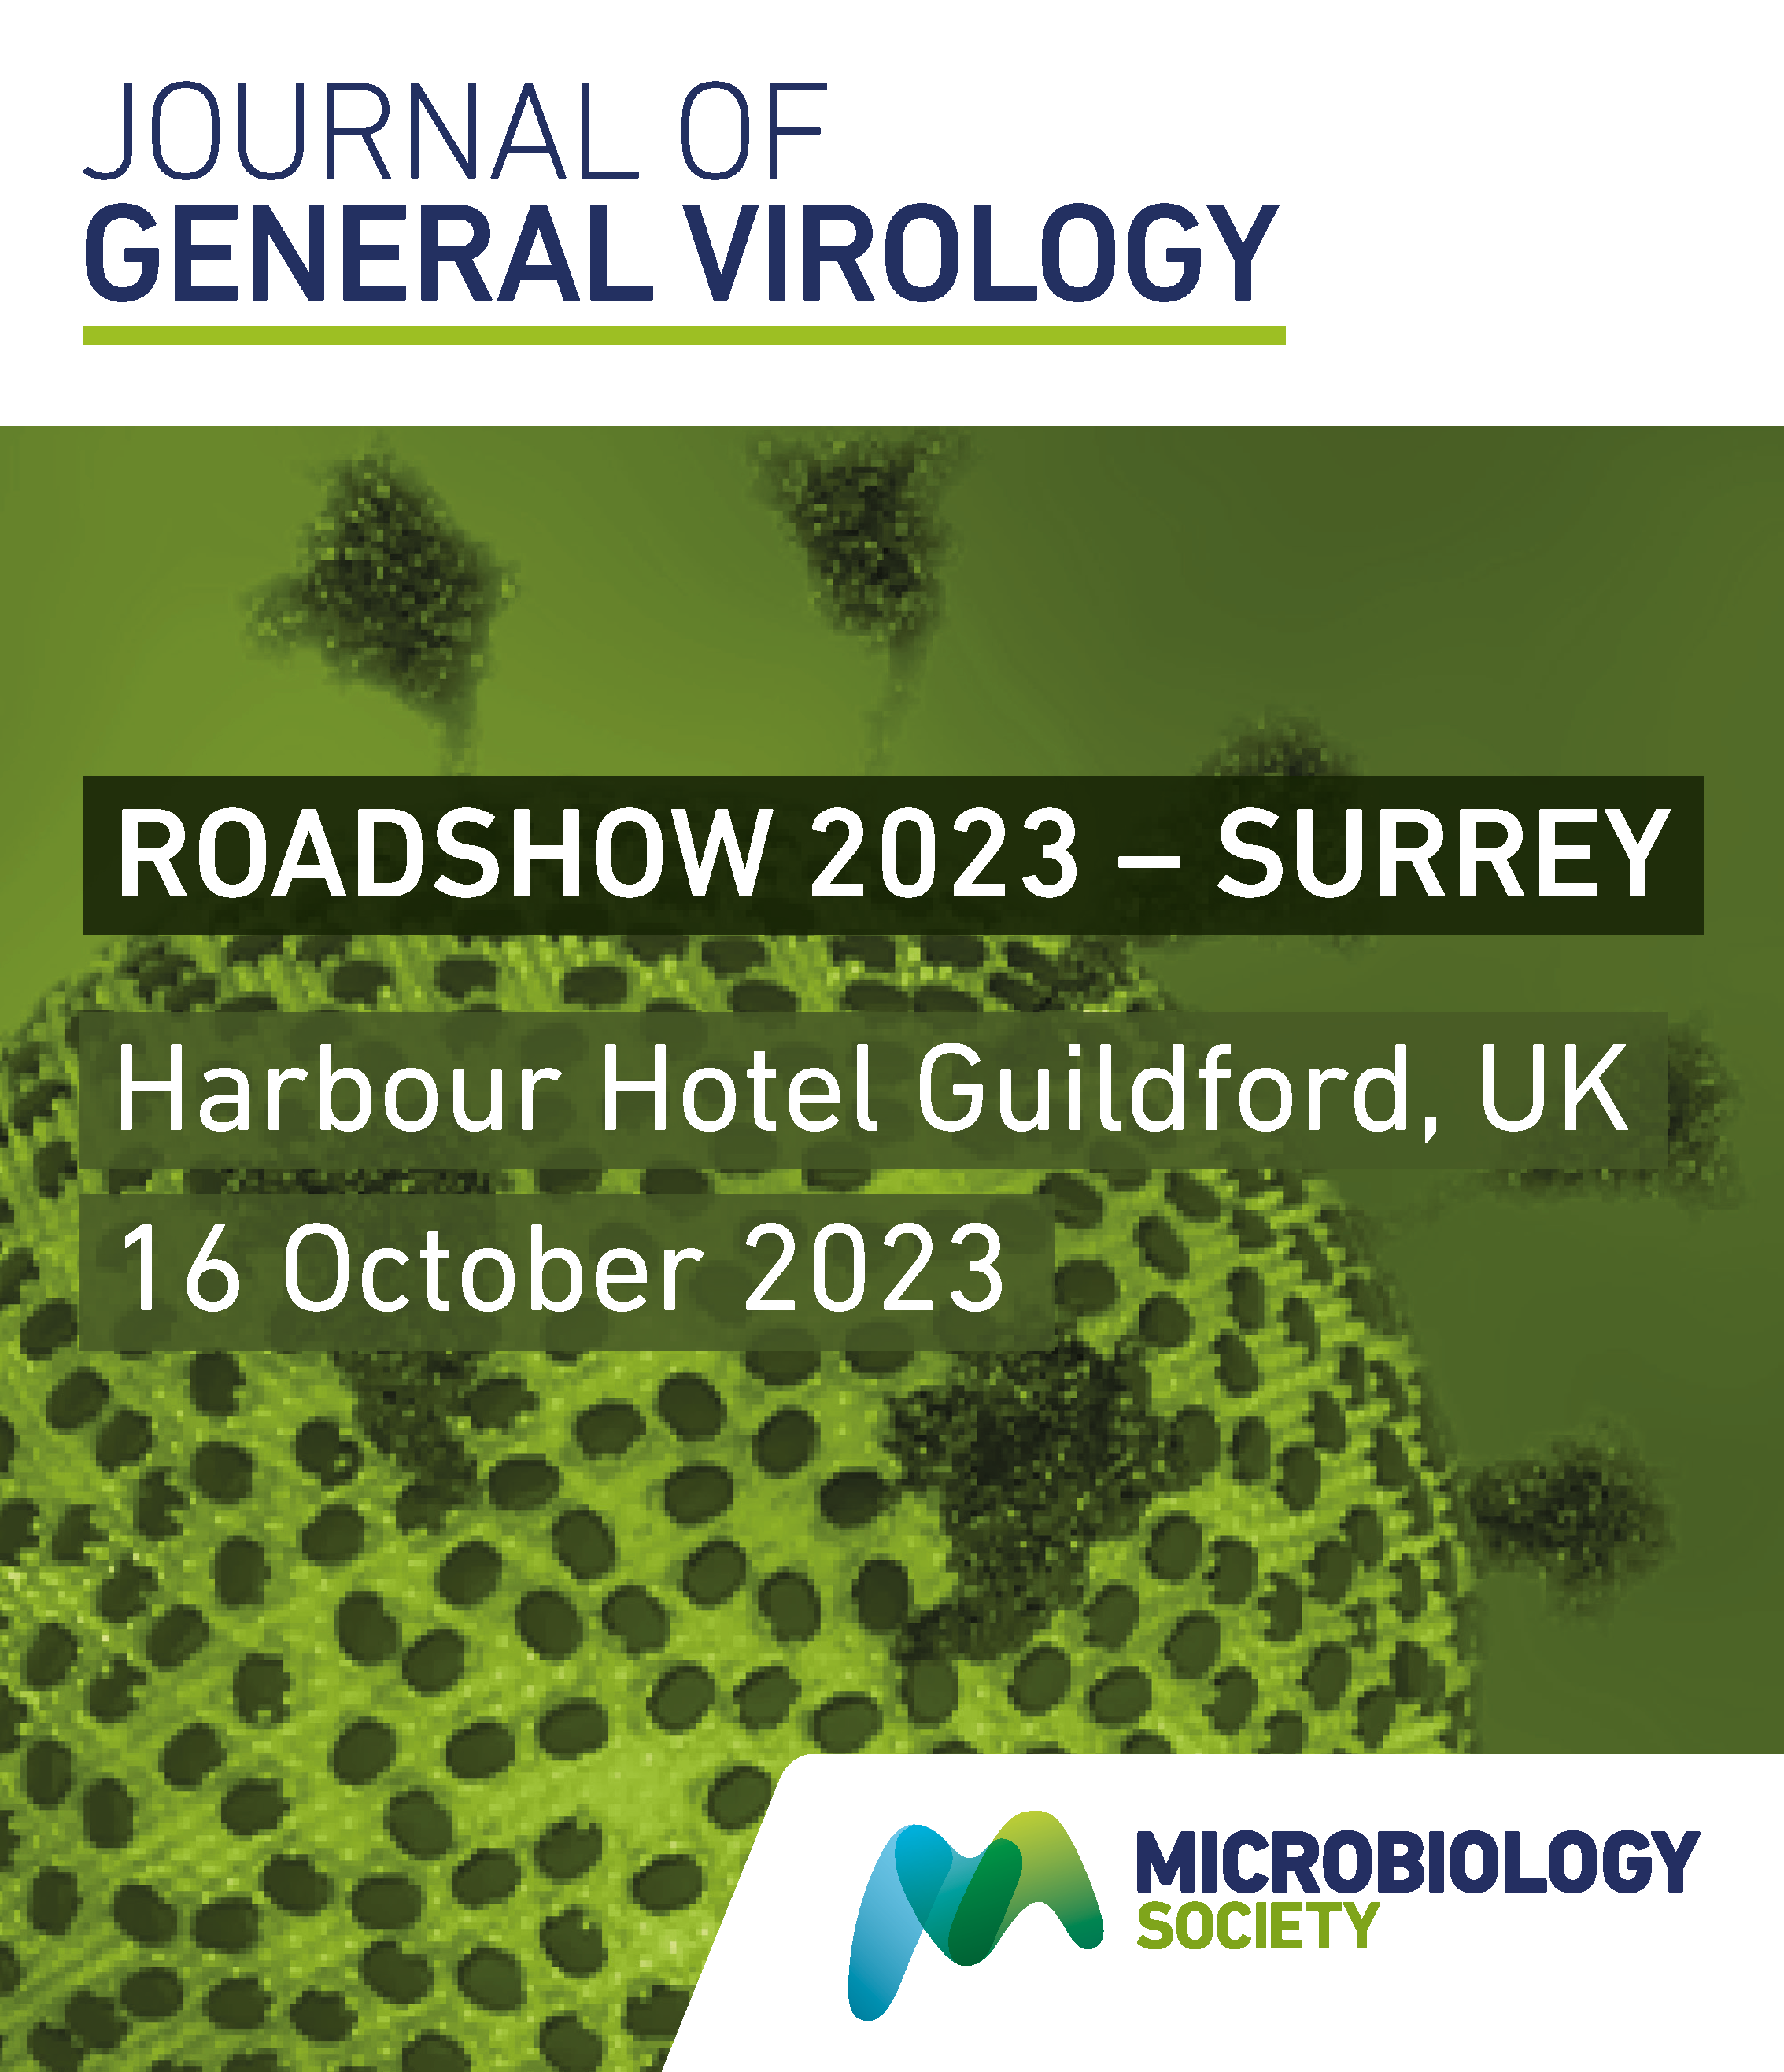 White text on Green background over picture of a virus reading Roadshow 2023 - Surrey, Harbour Hotel Guildford, UK 16 Otcober 2023. Heading of advert in blue text with green underlining is Journal of General Virology